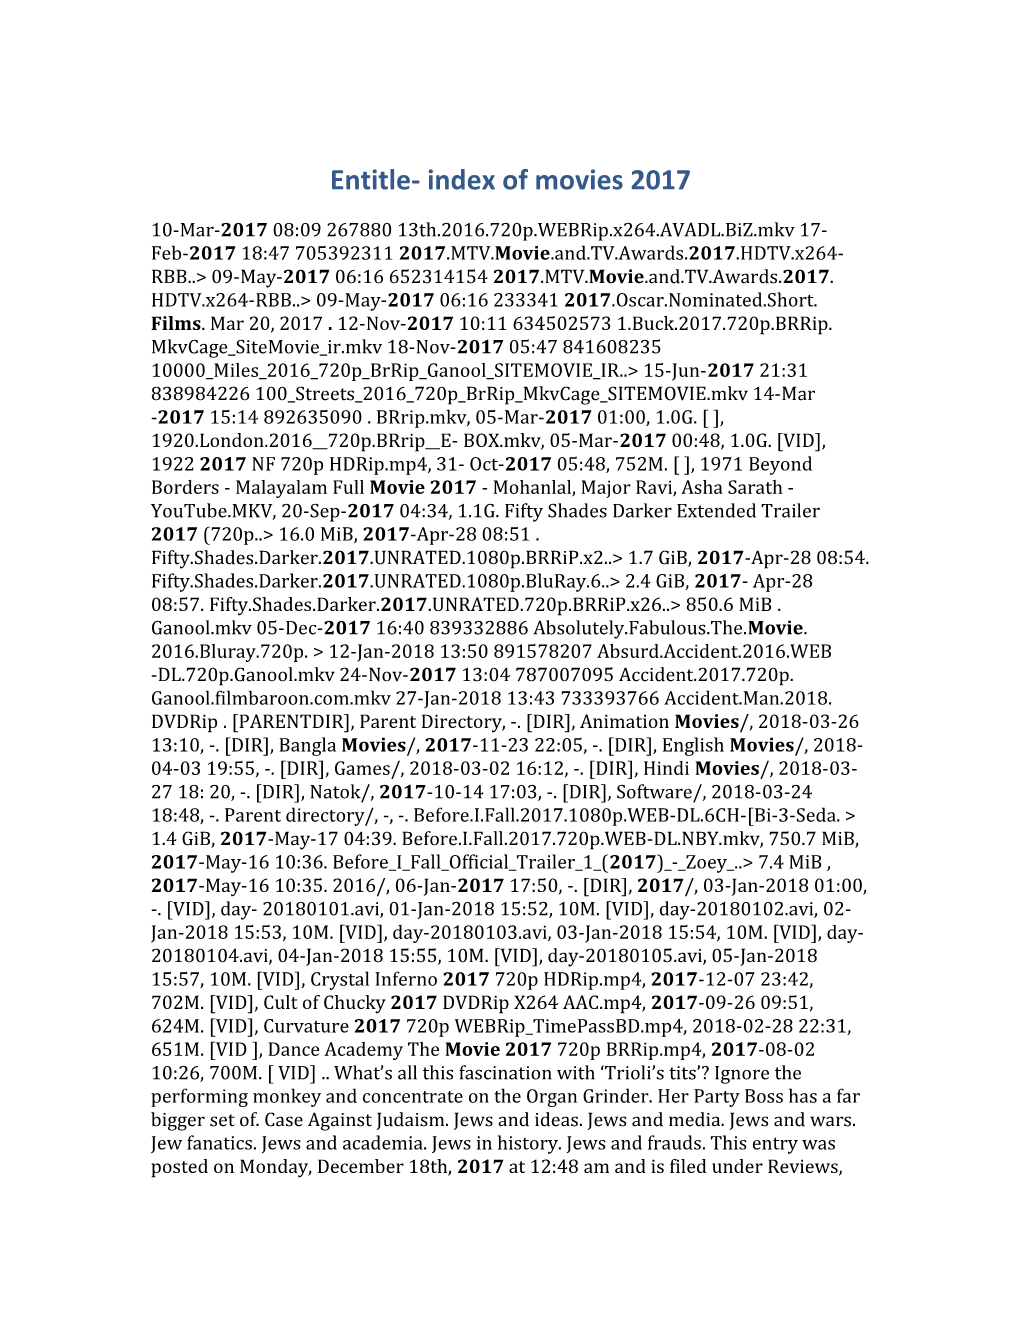 Entitle- Index of Movies 2017